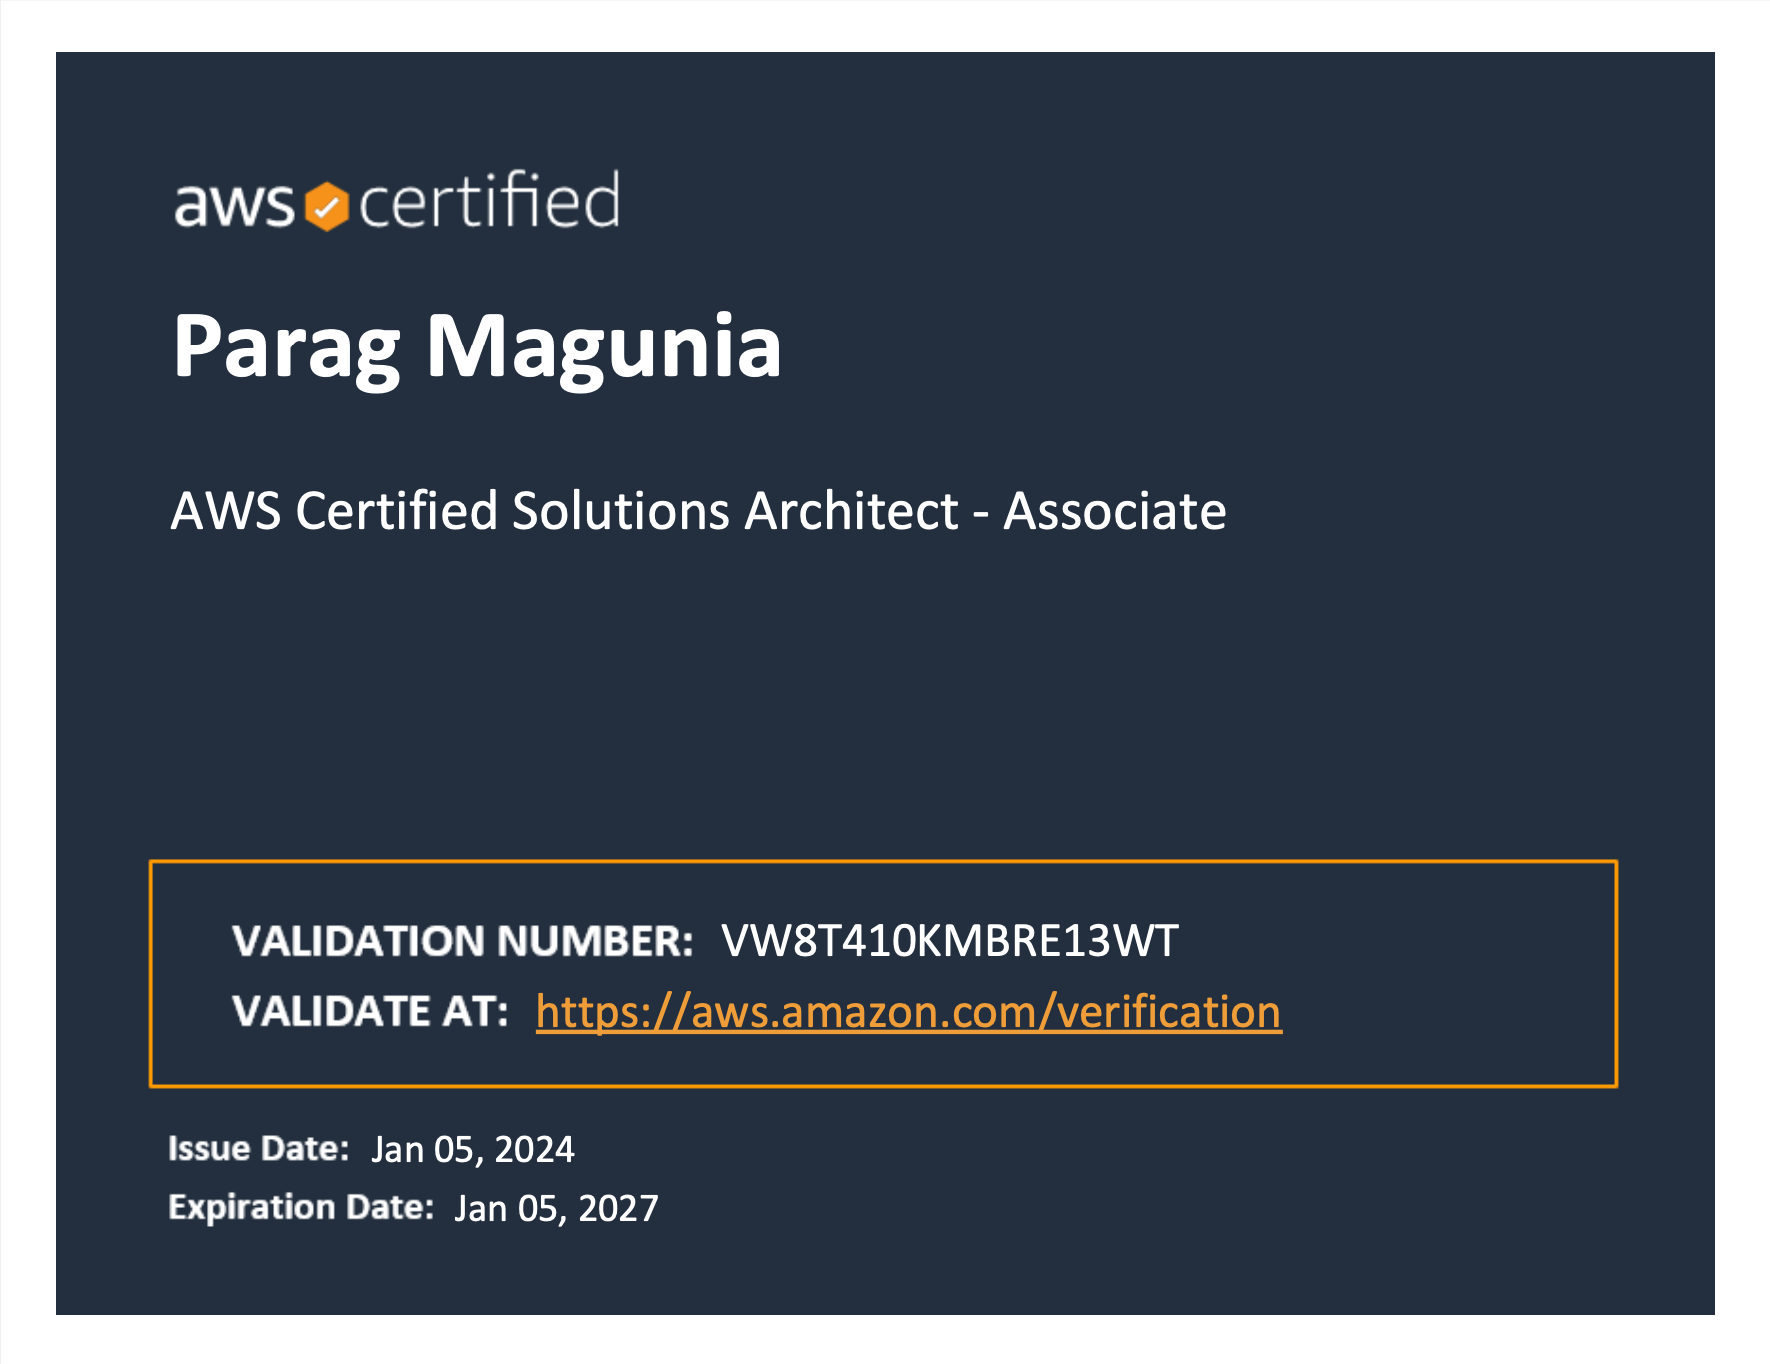 Parag's AWS SAA-C03 credential